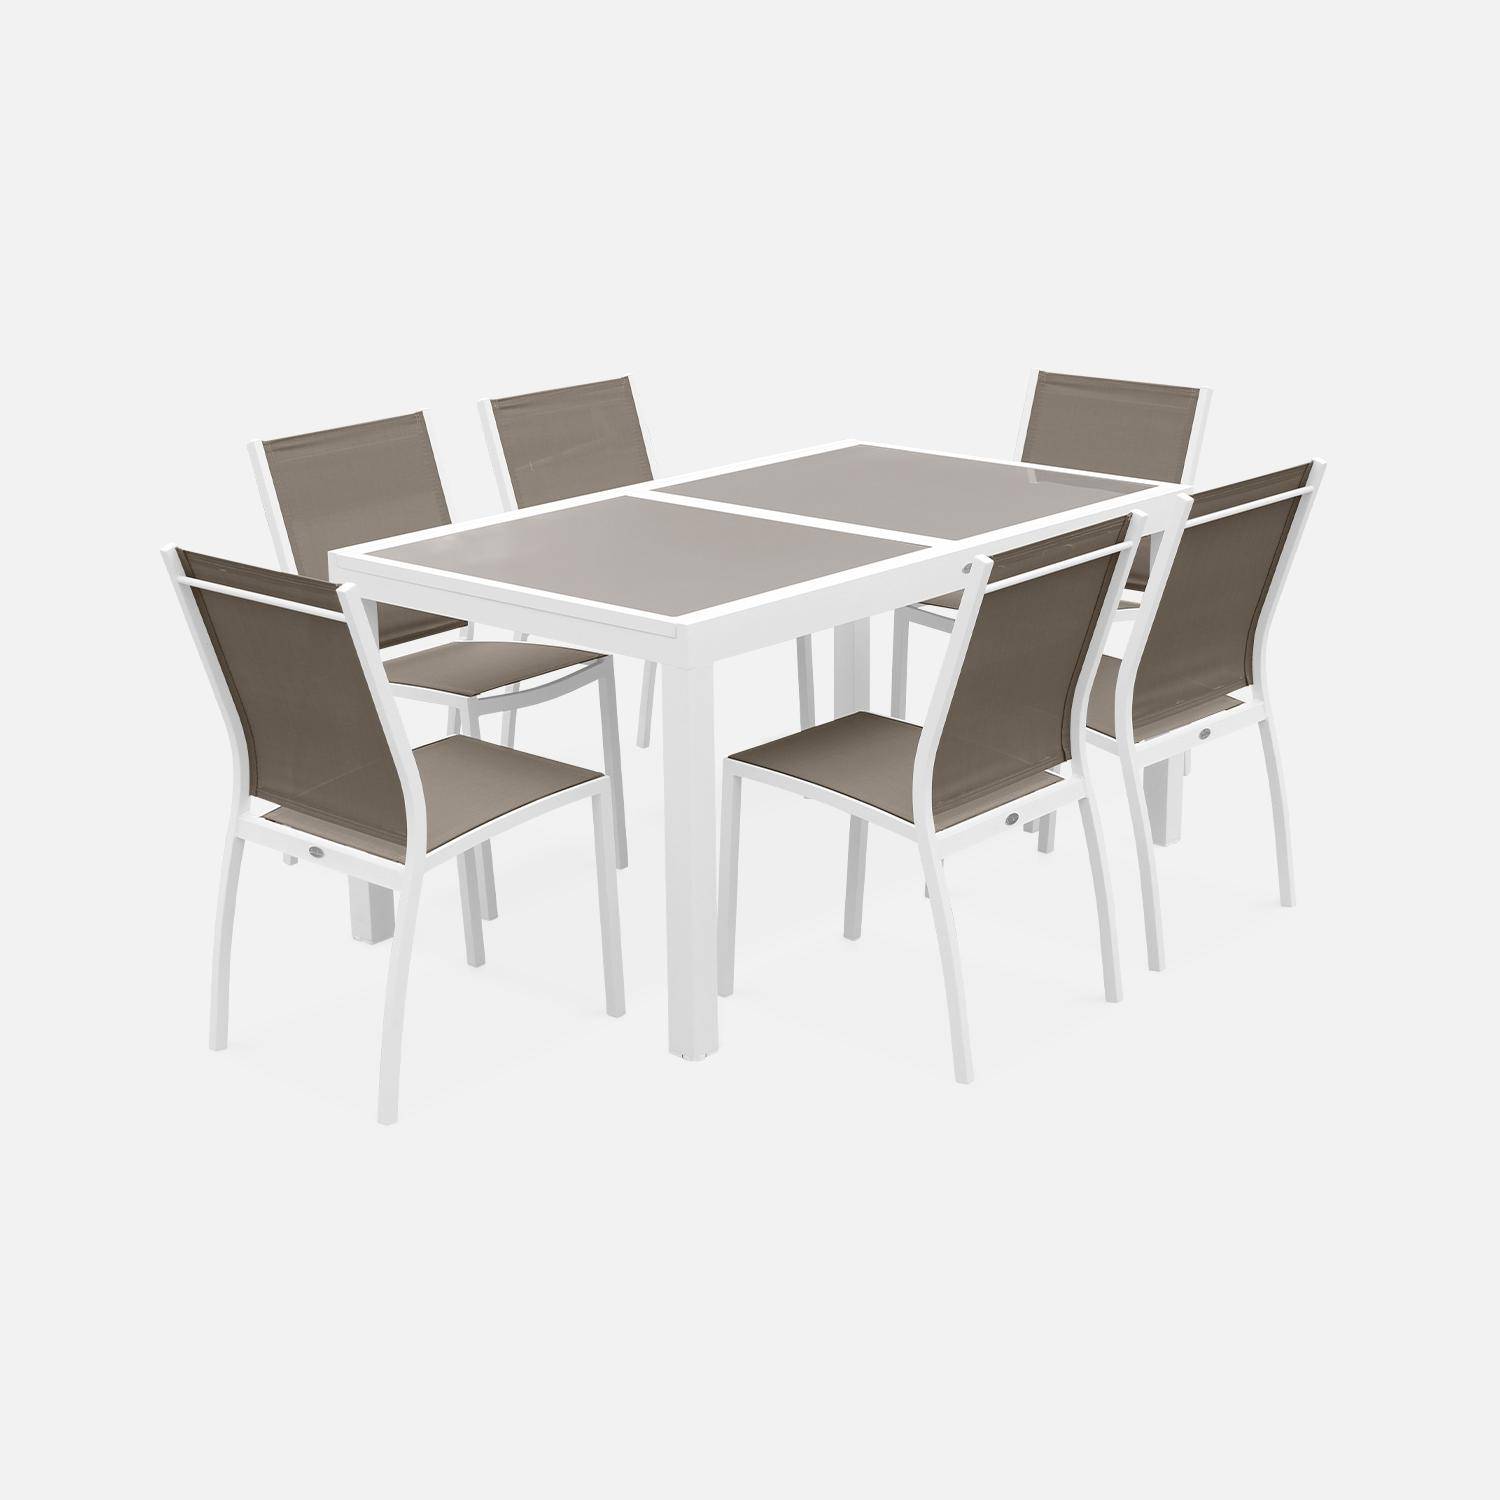 6-seater garden dining set, extendable 150-210cm aluminium table and 6 chairs - Orlando - White frame, Beige-Brown textilene Photo3